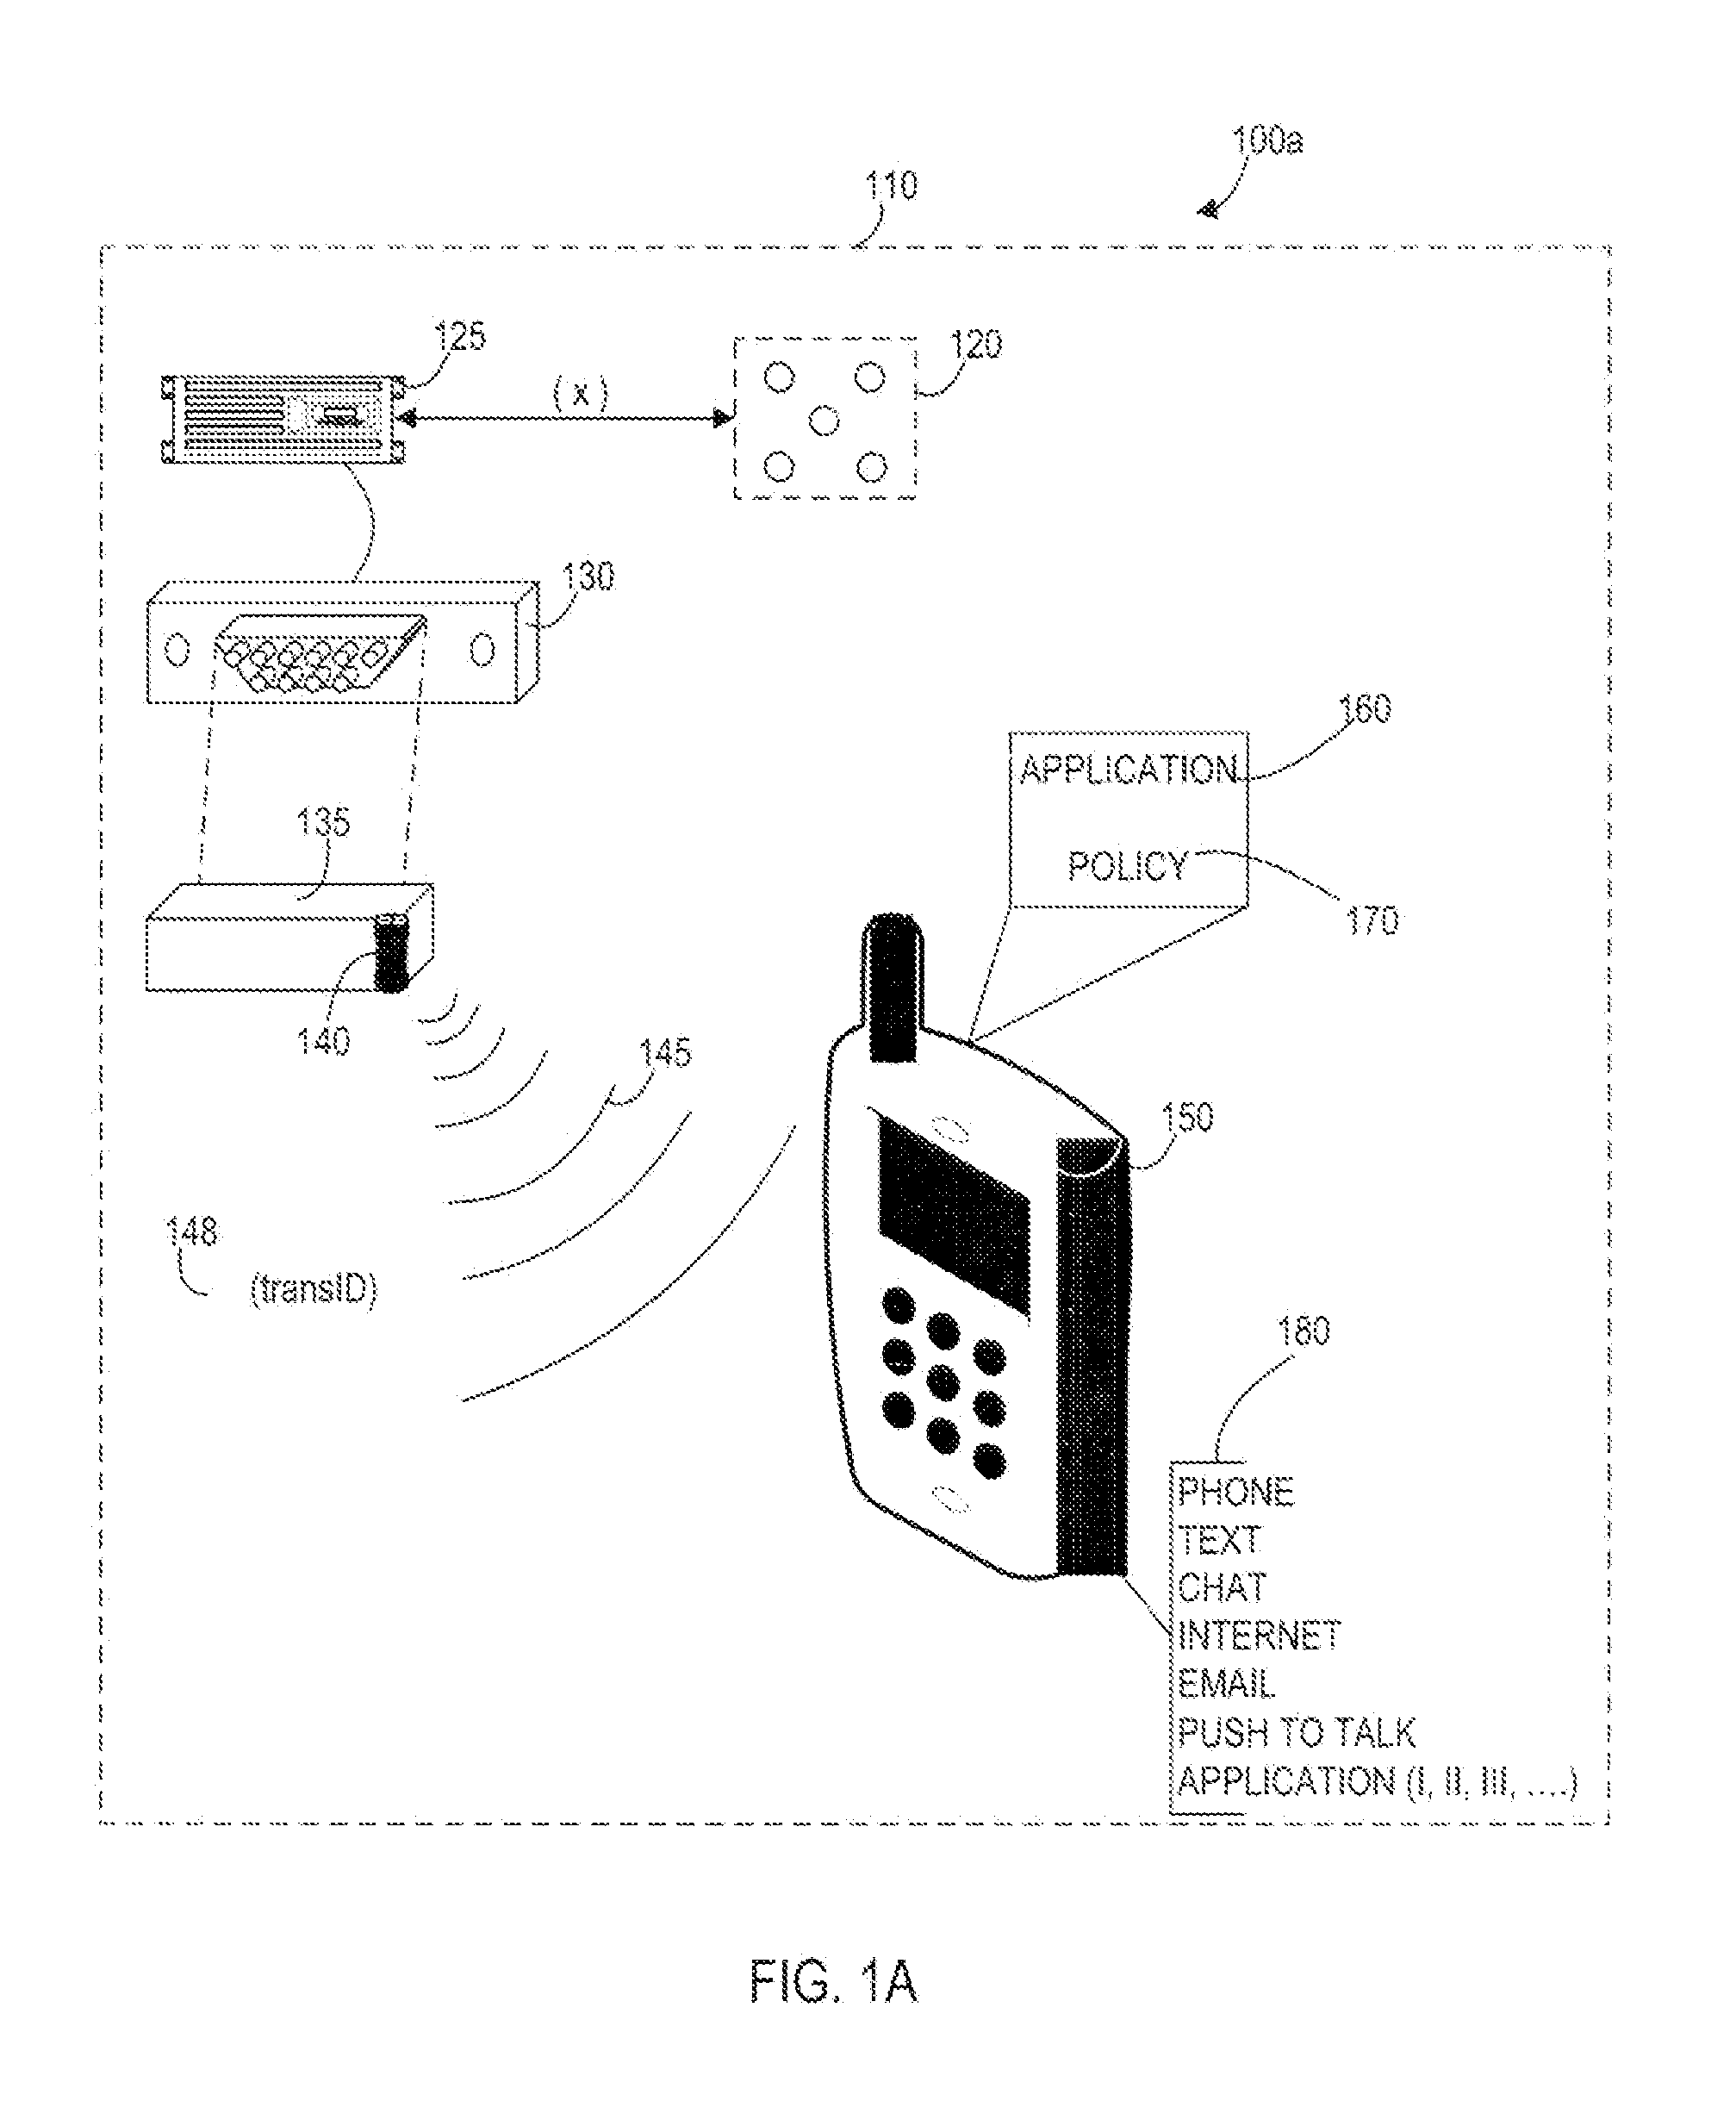 Systems, Methods, and Devices for Policy-Based Control and Monitoring of Use of Mobile Devices by Vehicle Operators